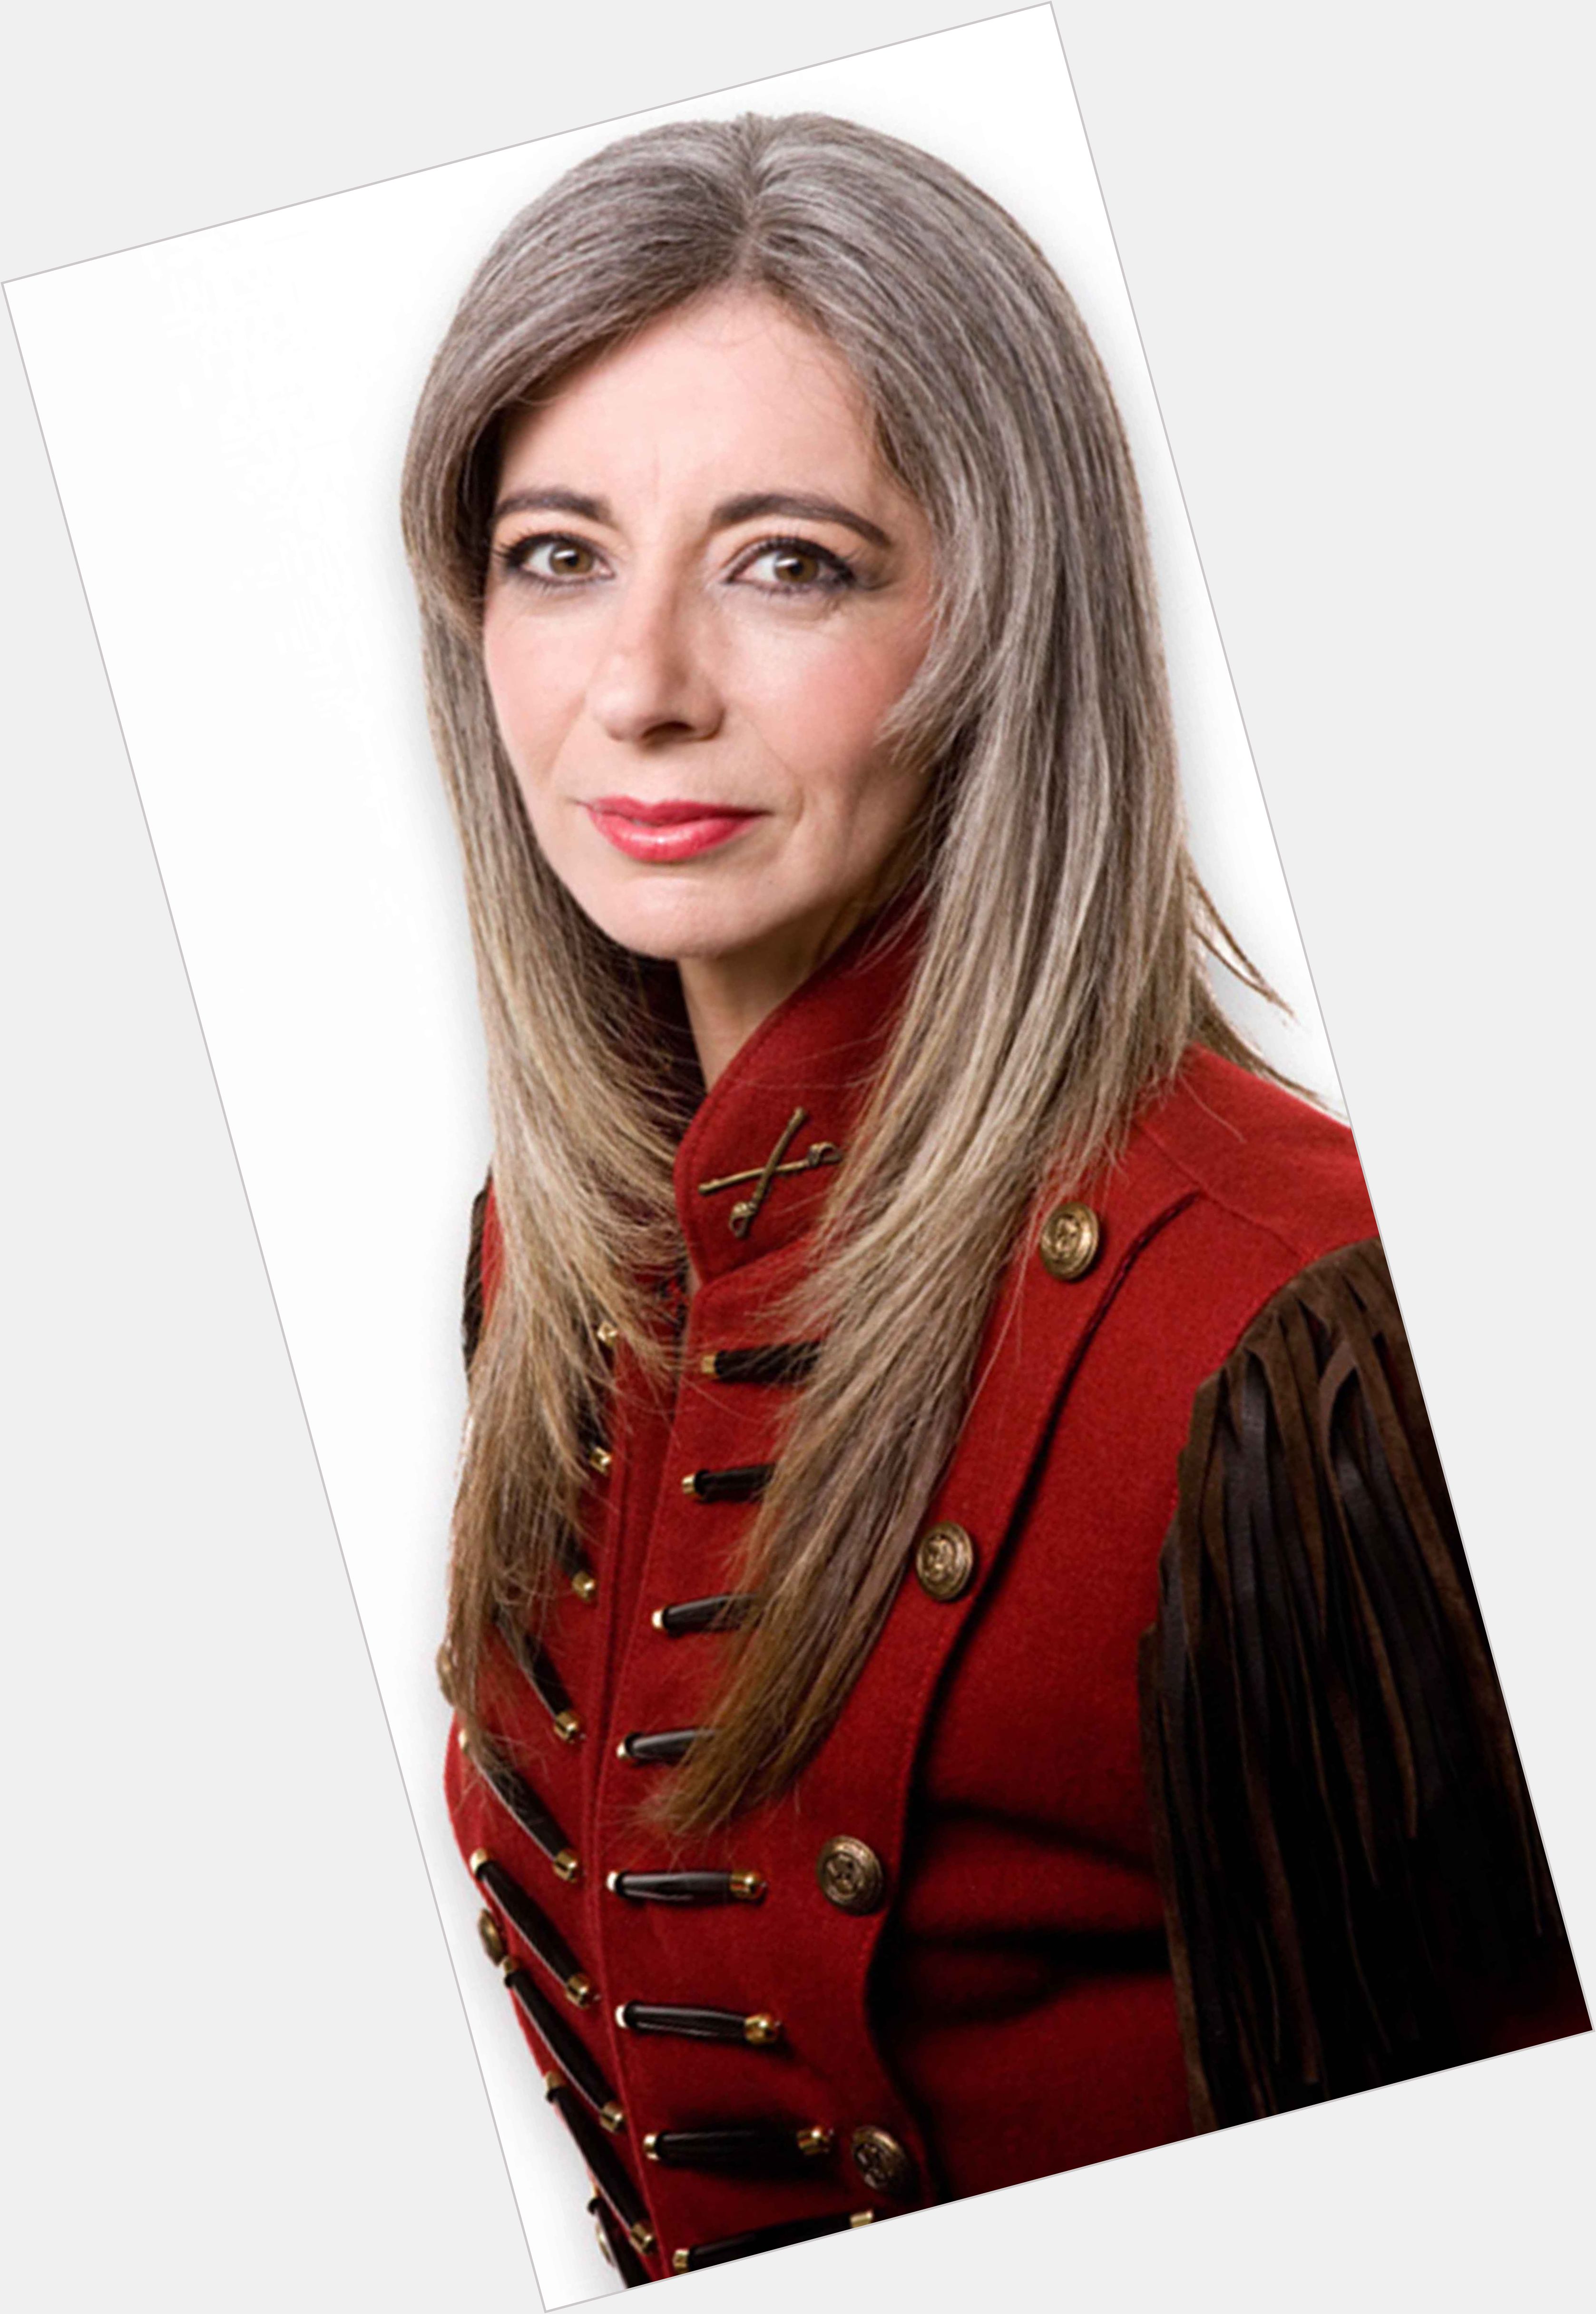 Http://fanpagepress.net/m/E/Evelyn Glennie Exclusive Hot Pic 3